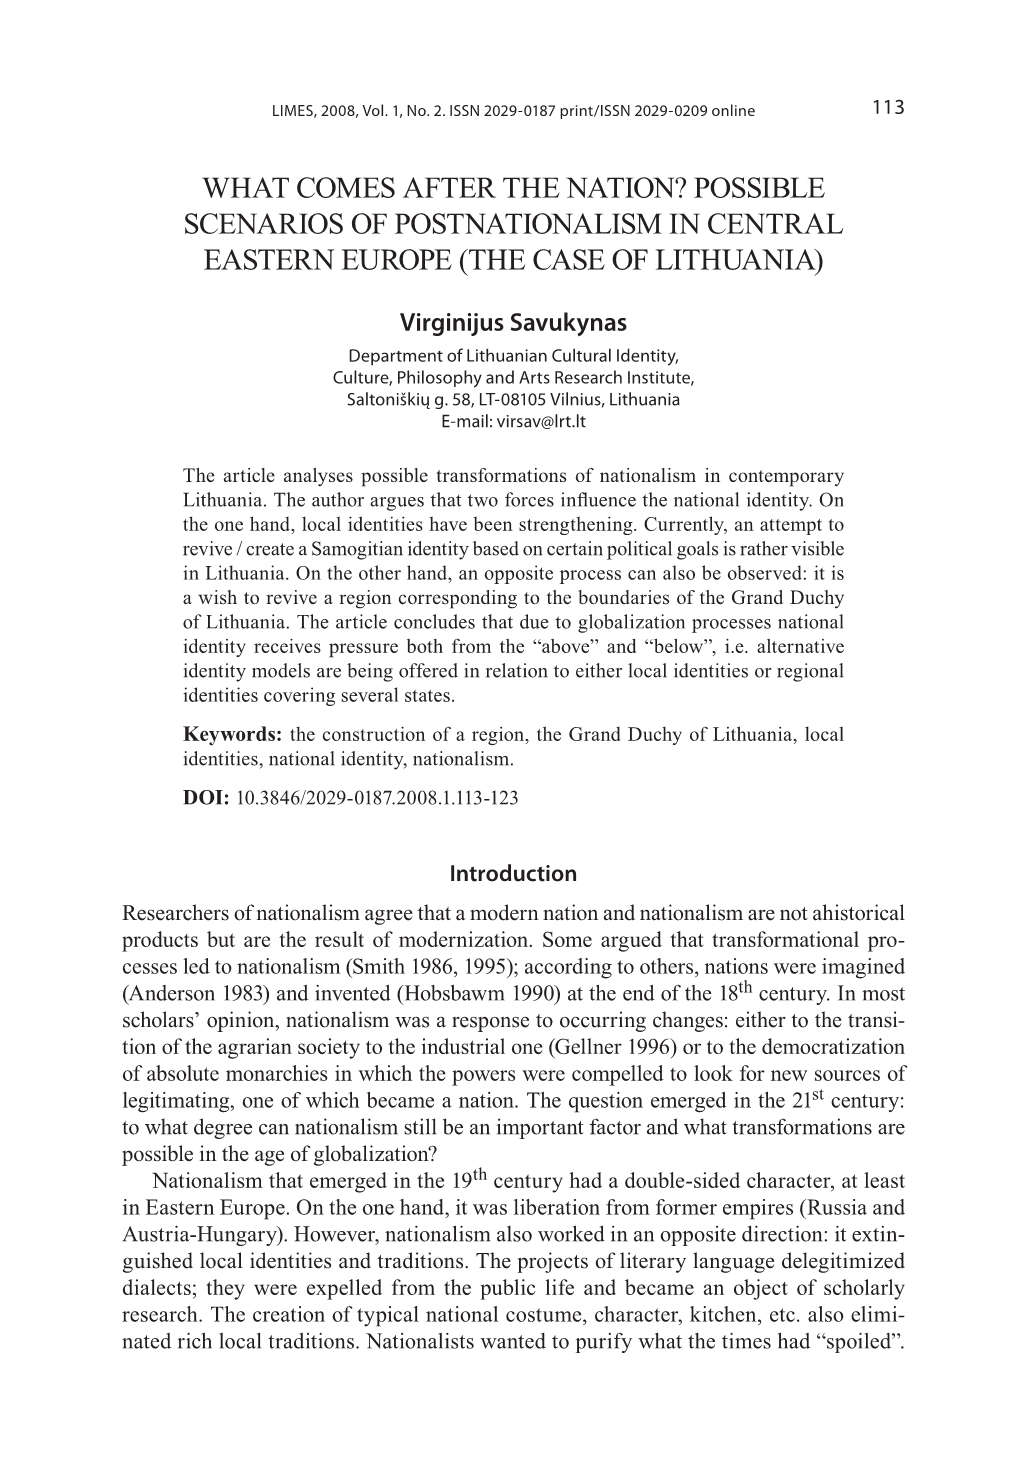 The Case of Lithuania)